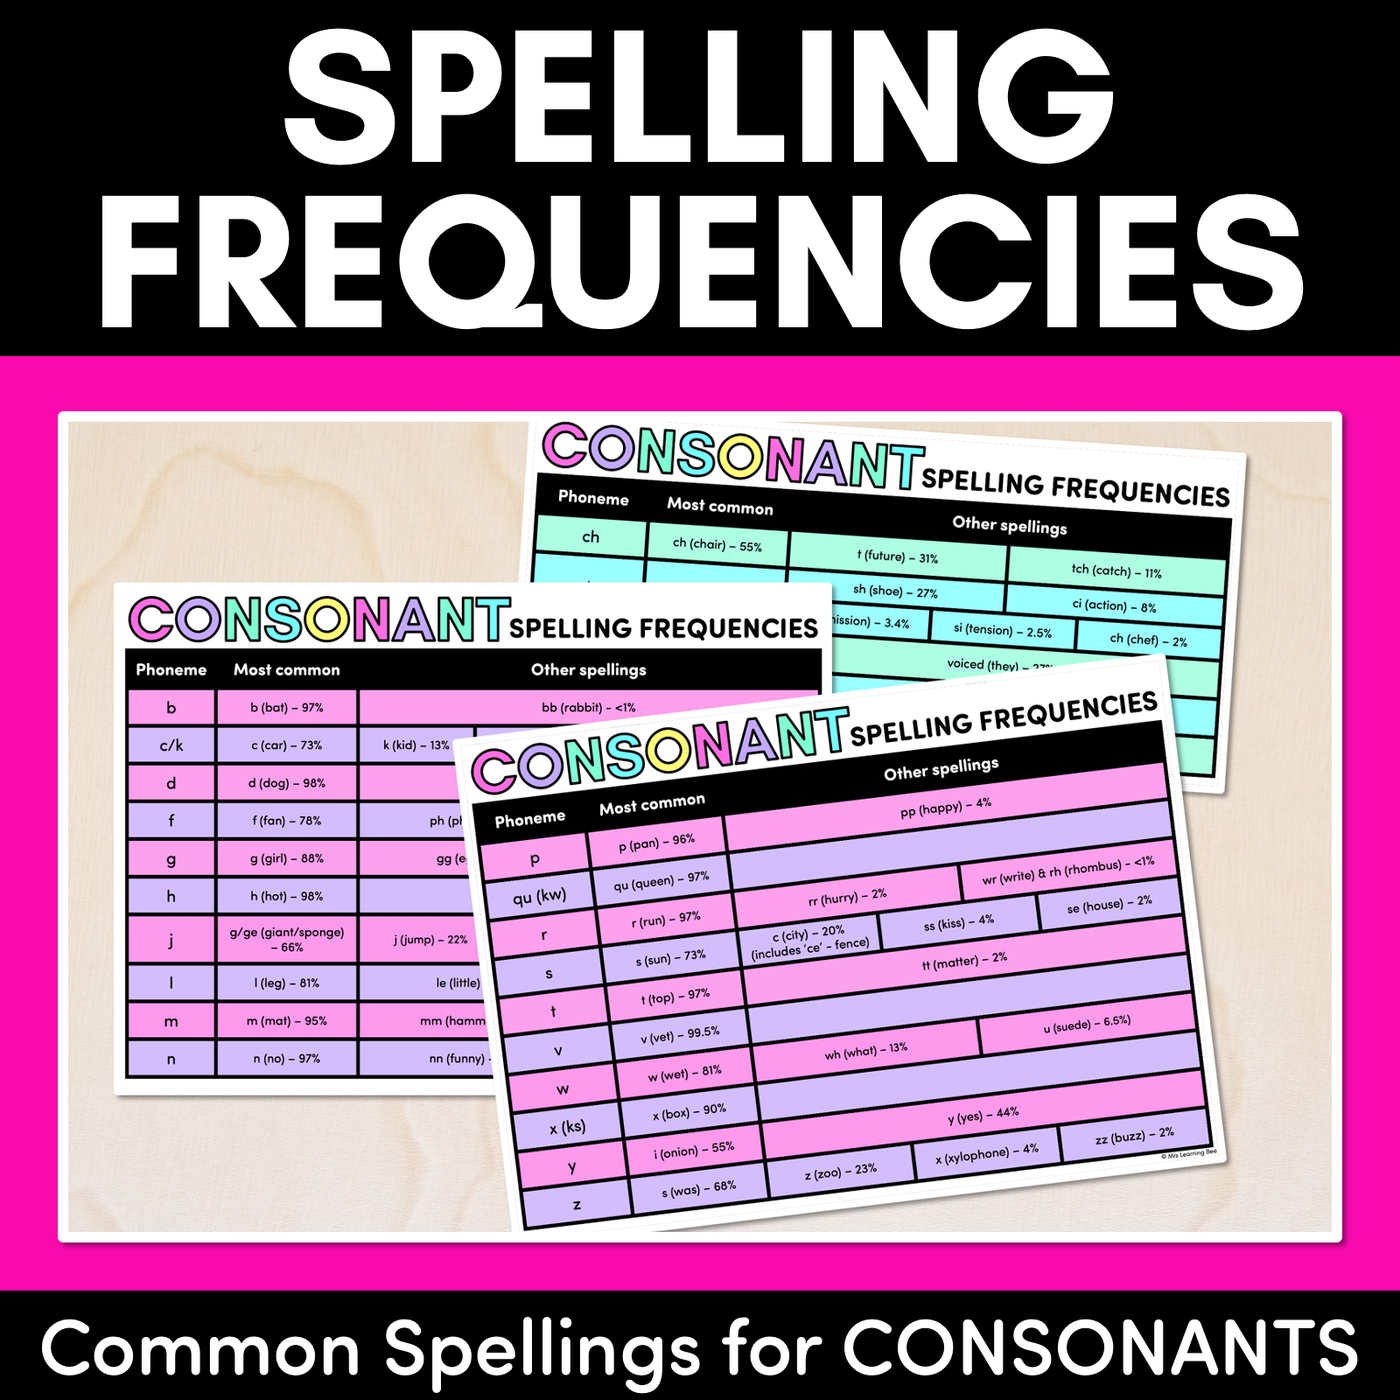 Spelling Frequencies for CONSONANT SOUNDS